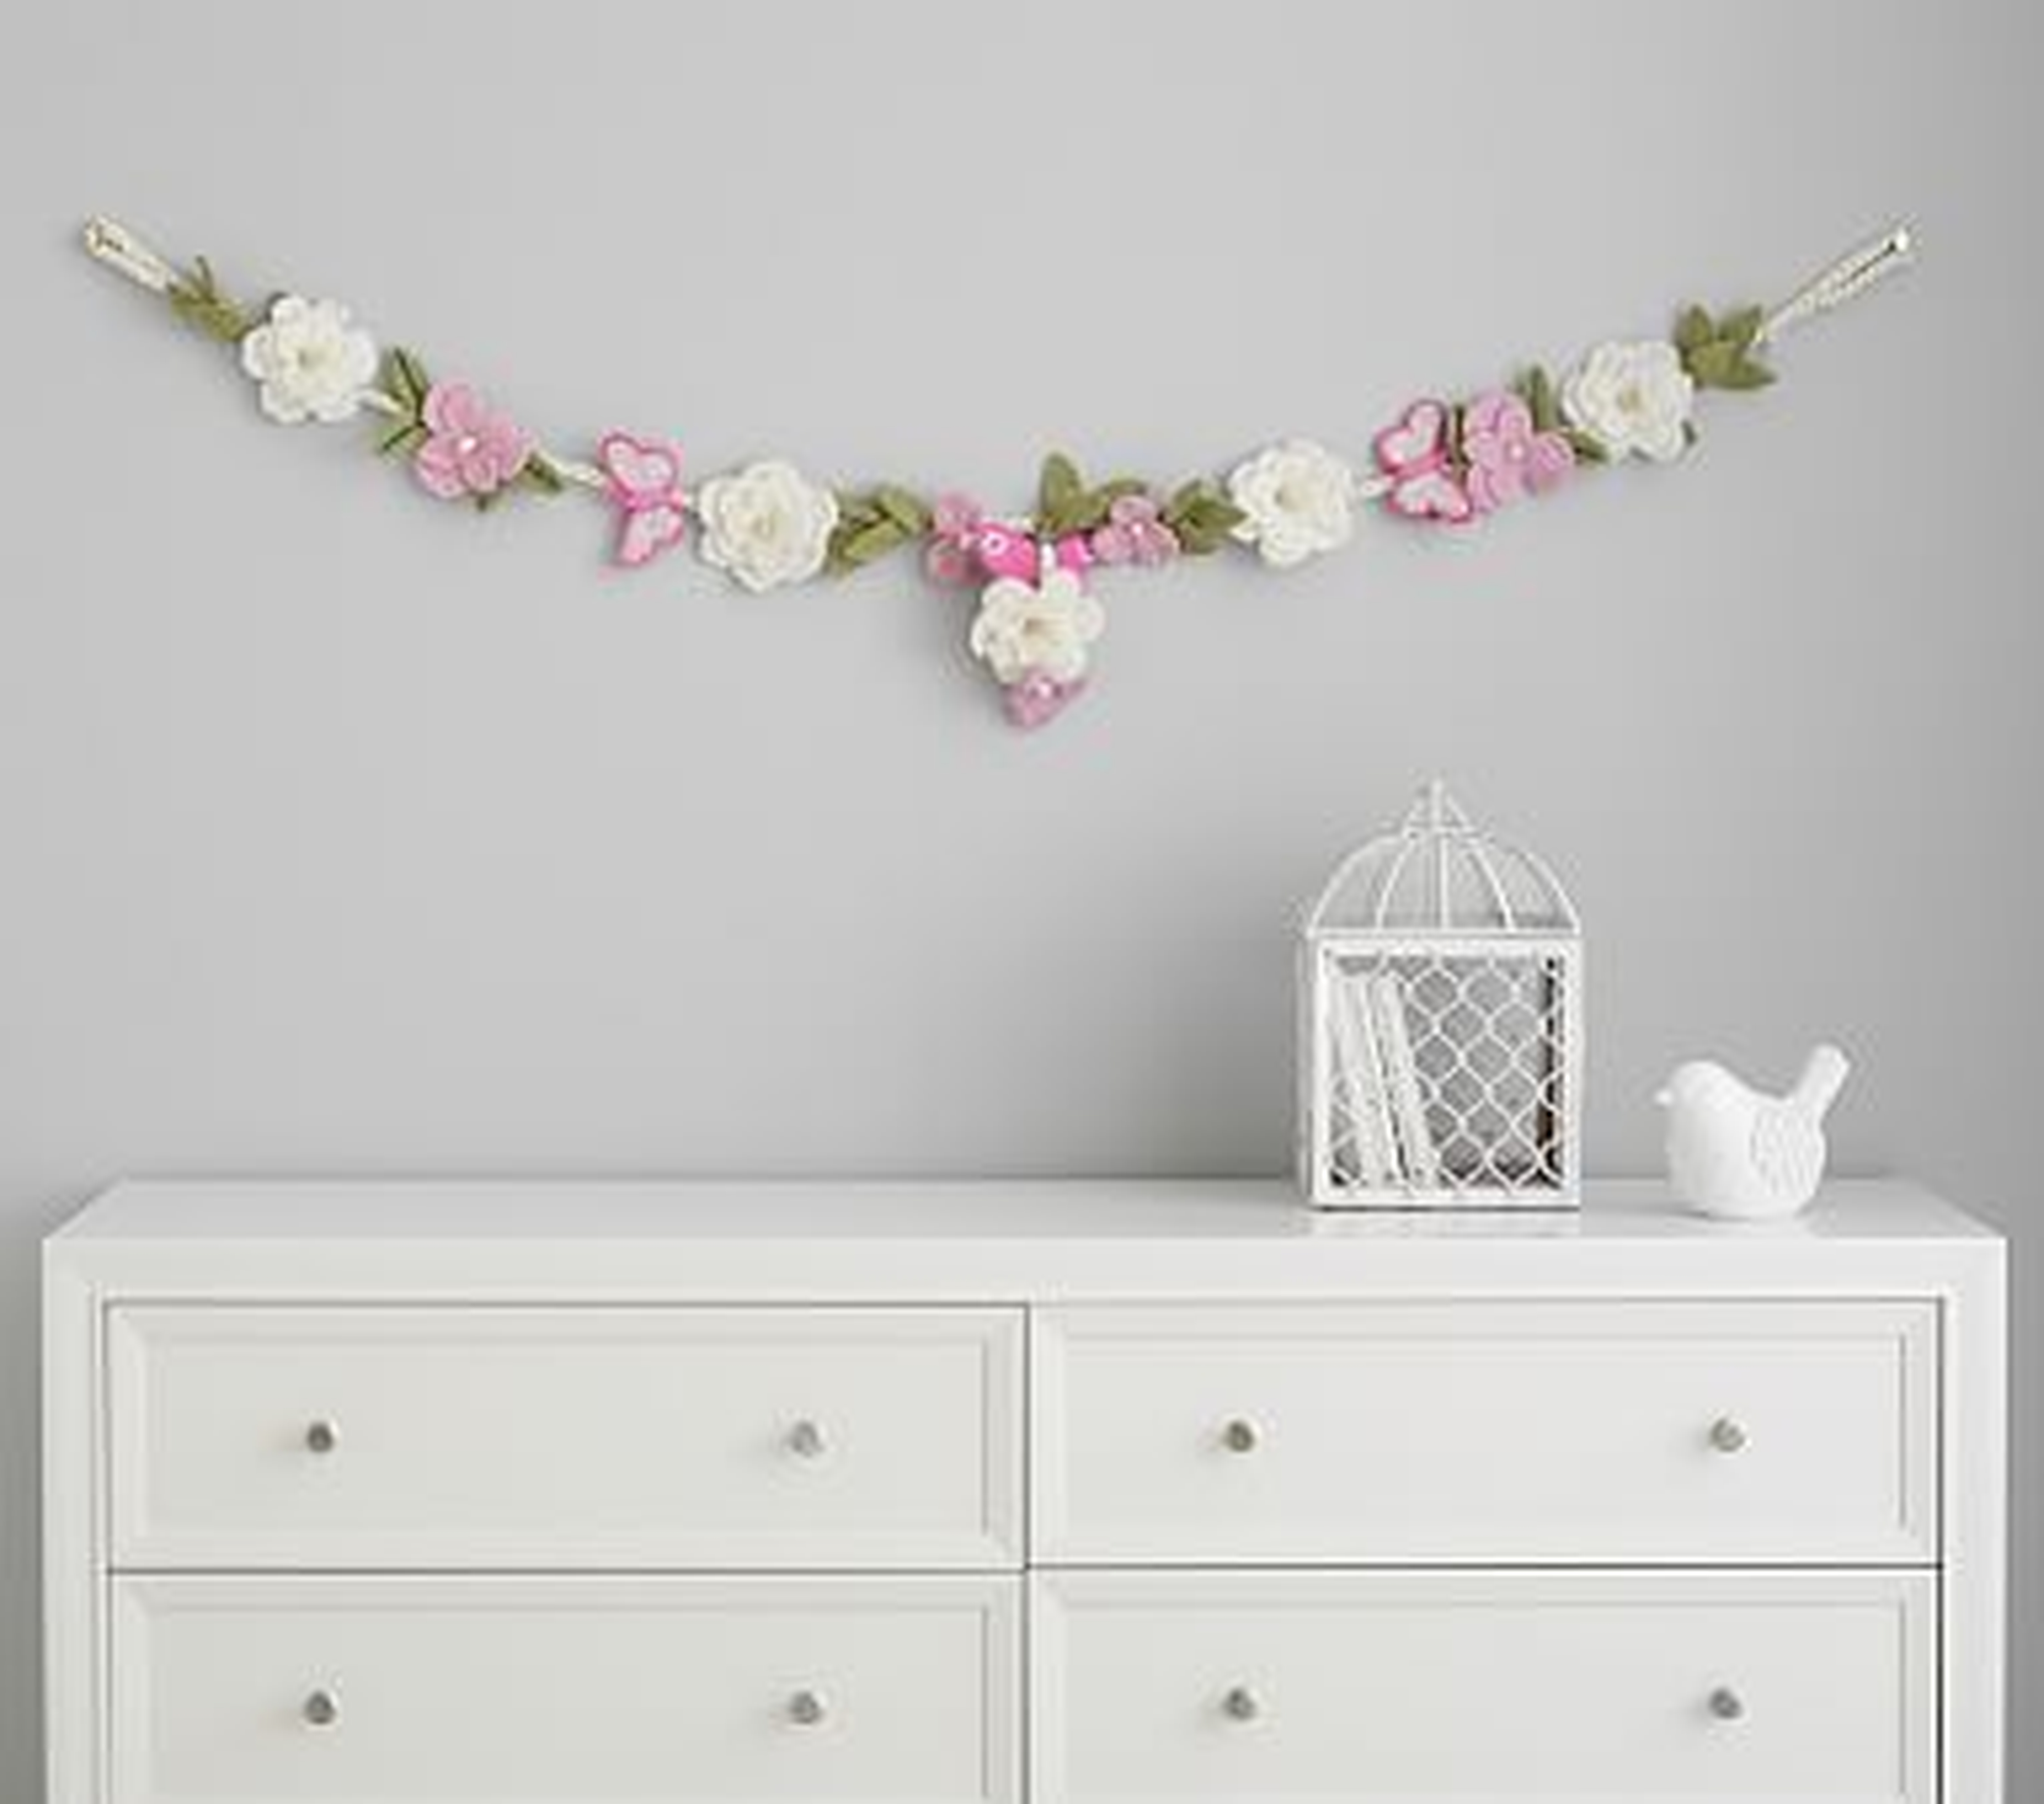 Felted Wool Floral Garland - Pottery Barn Kids